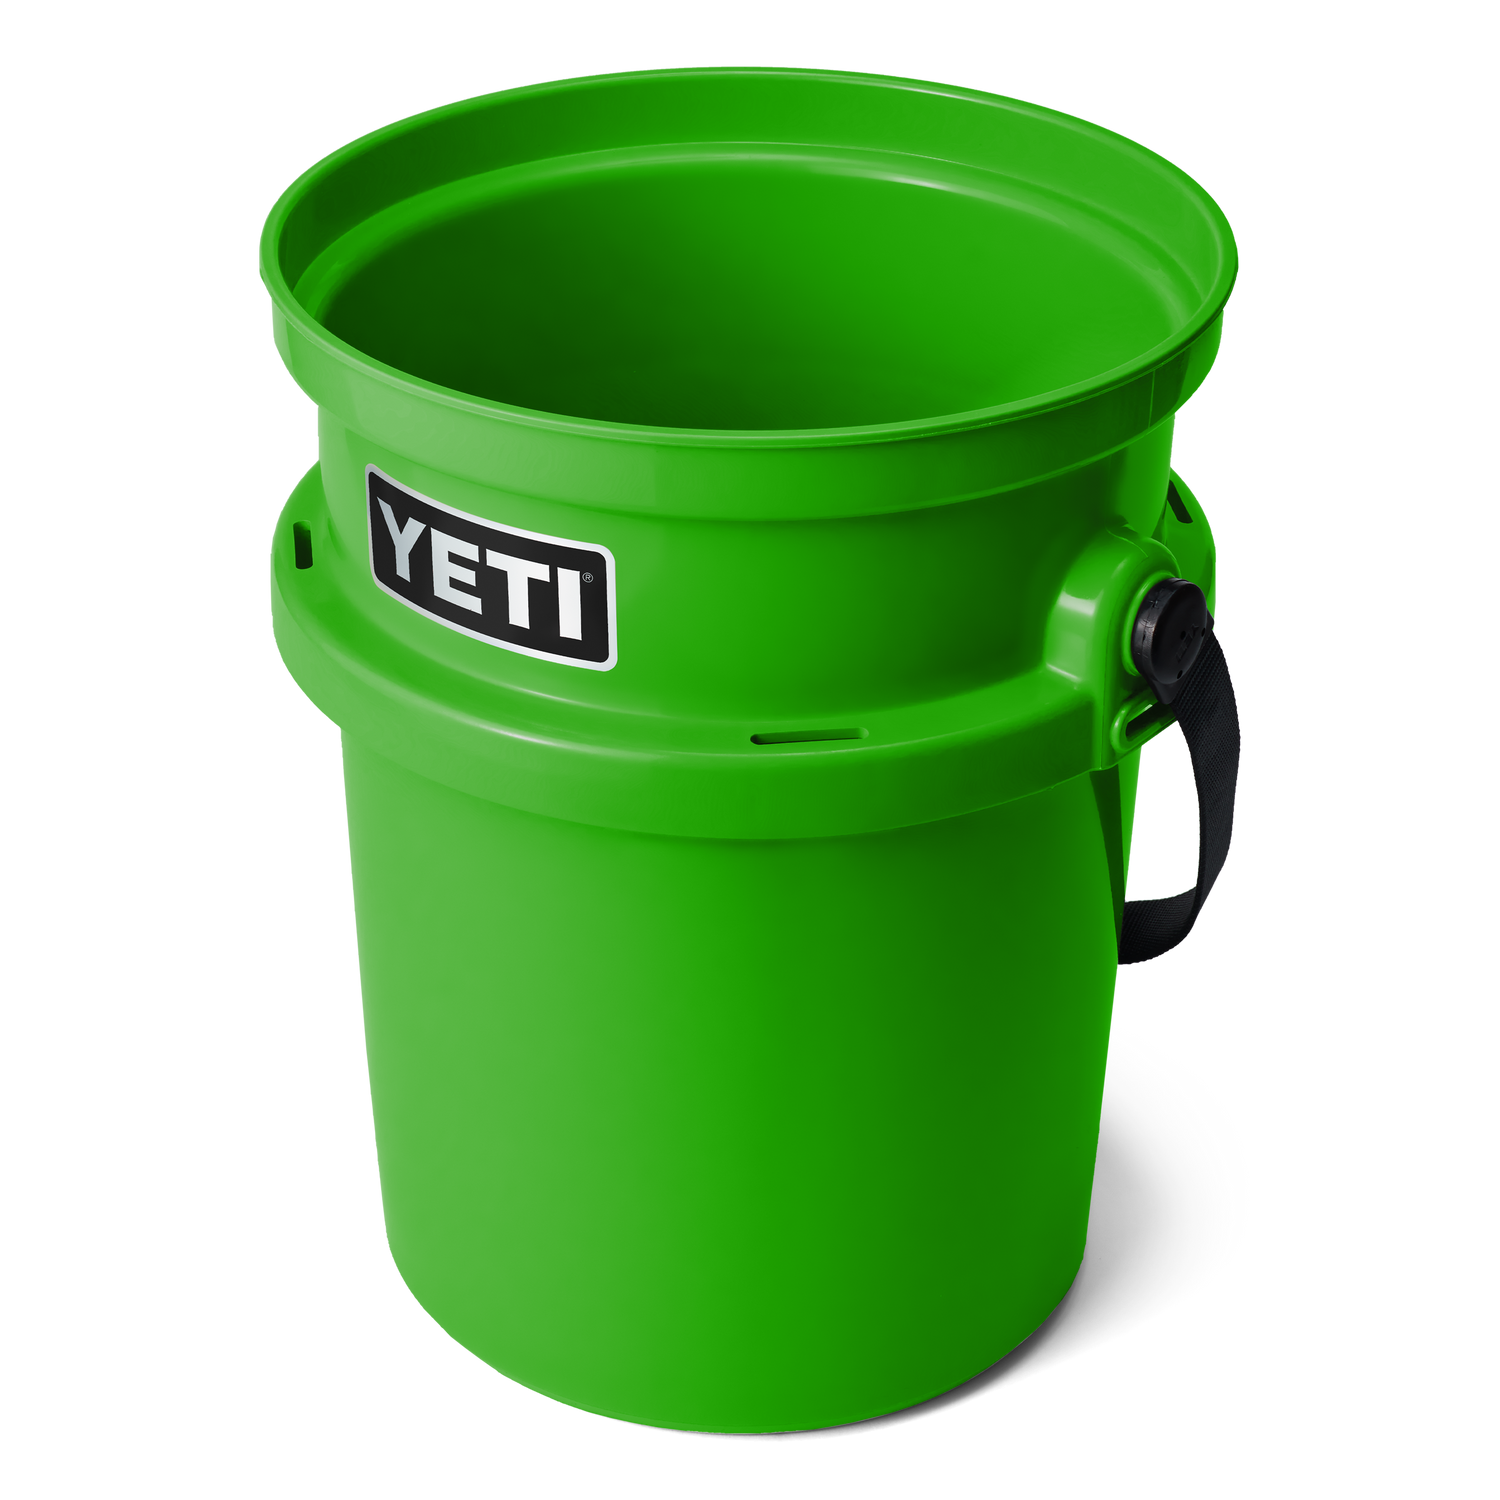 YETI Accessories For LoadOut Buckets – YETI EUROPE